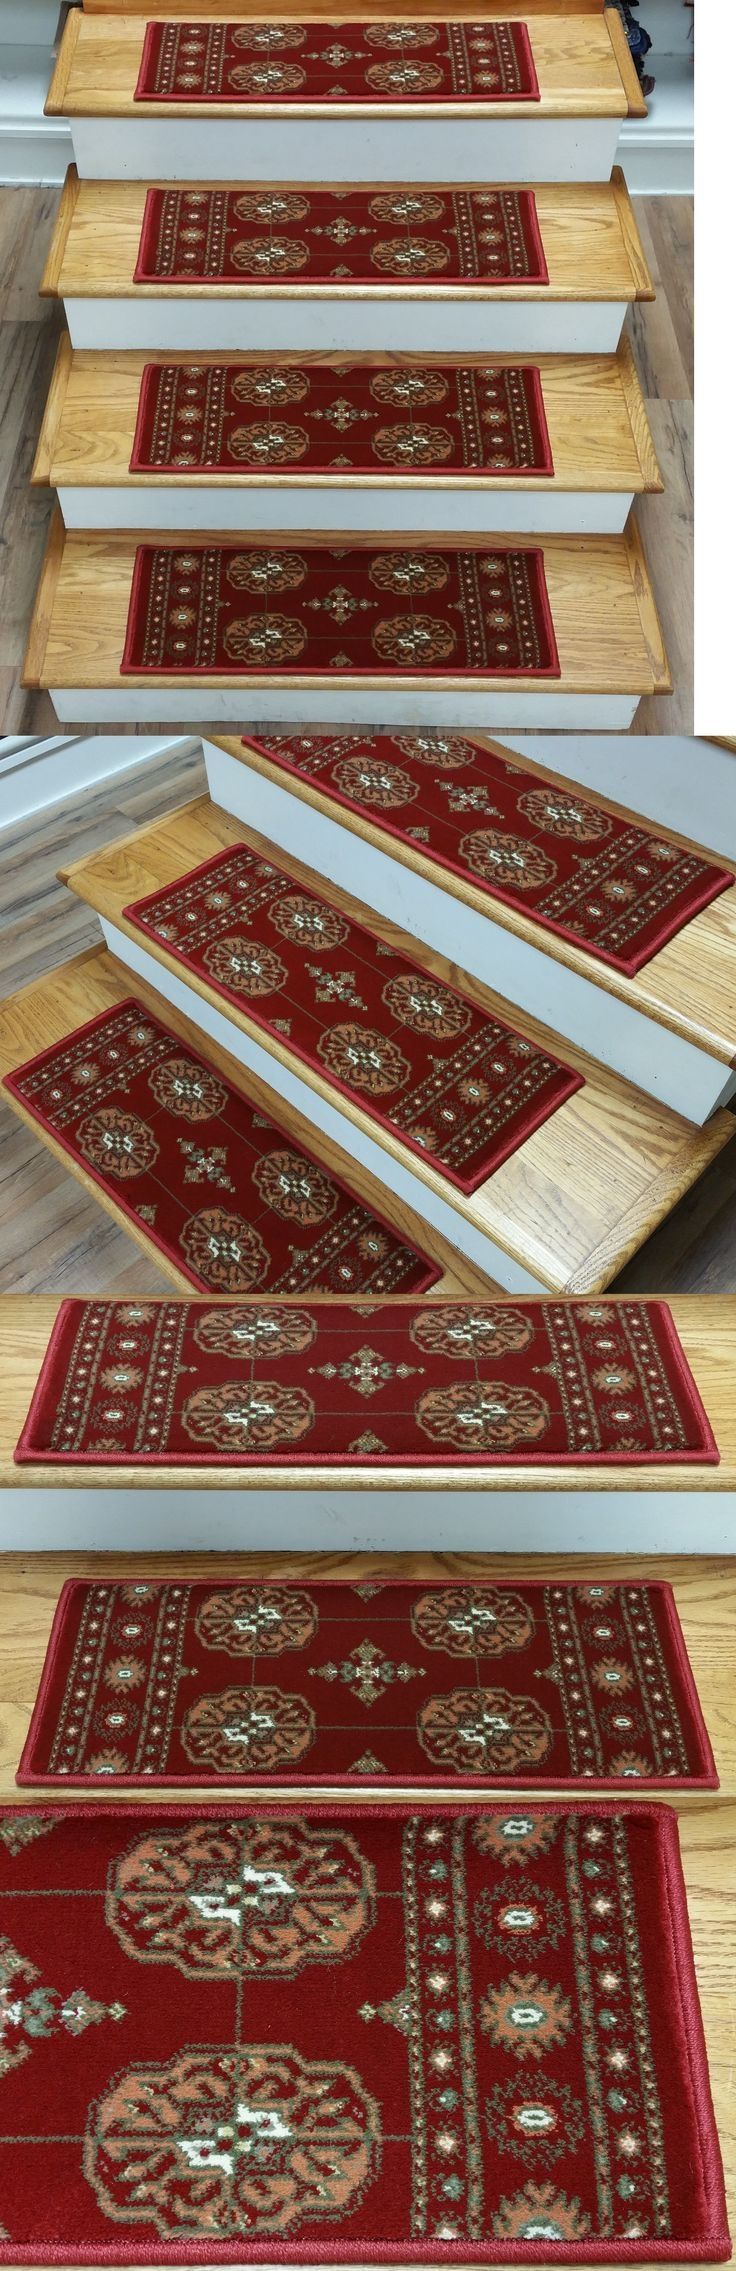 Best 20 Stair Tread Rugs Ideas On Pinterest Carpet Stair Treads Intended For Oval Stair Tread Rugs (View 20 of 20)